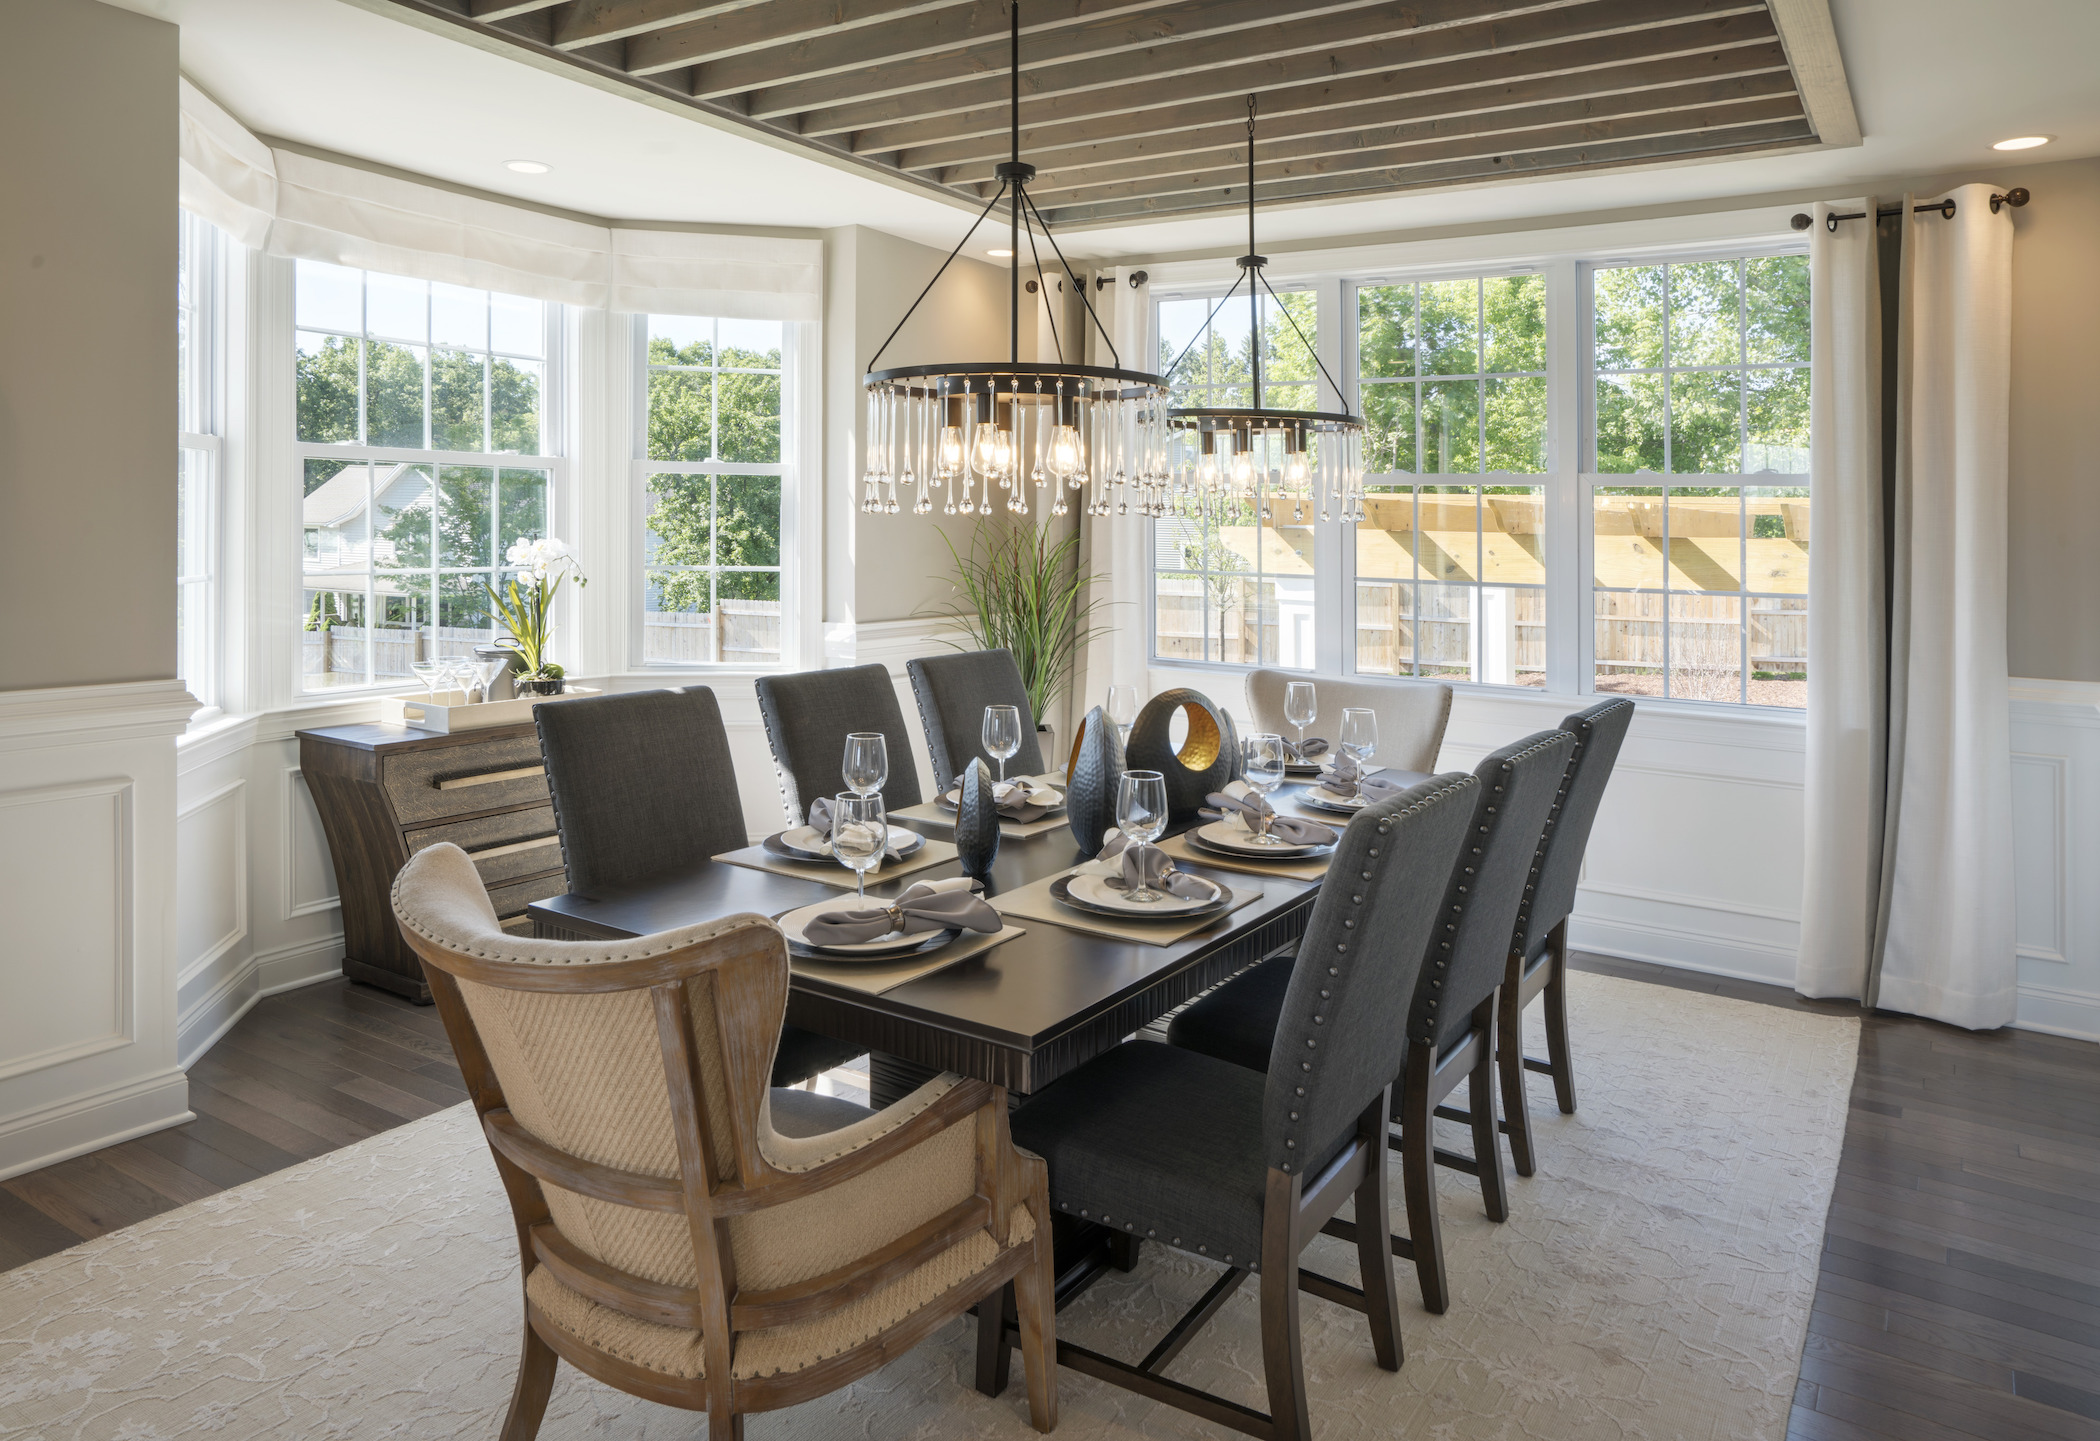 Formal dining room featuring matching pendant fixtures and plenty of natural lighting.